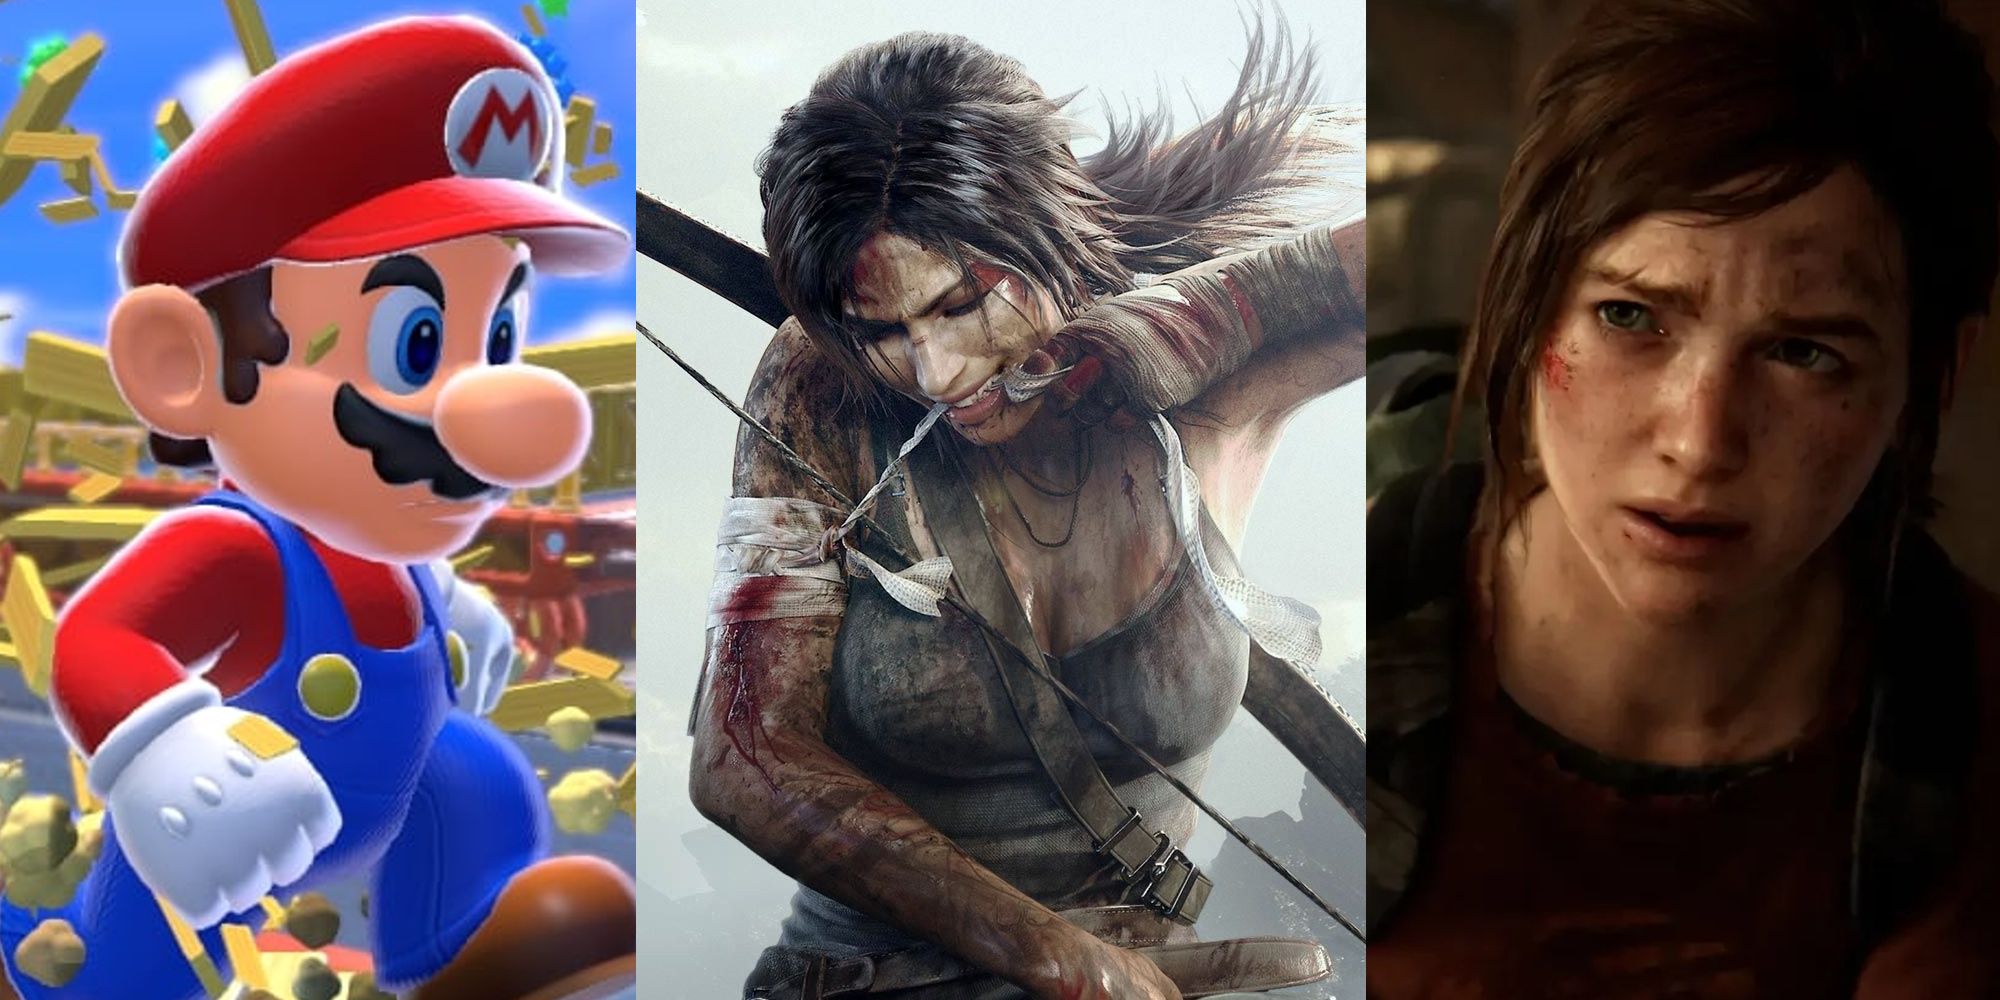 Giant Mario crushing boxes; Lara Croft tending to an arm wound; Ellie looking distraught